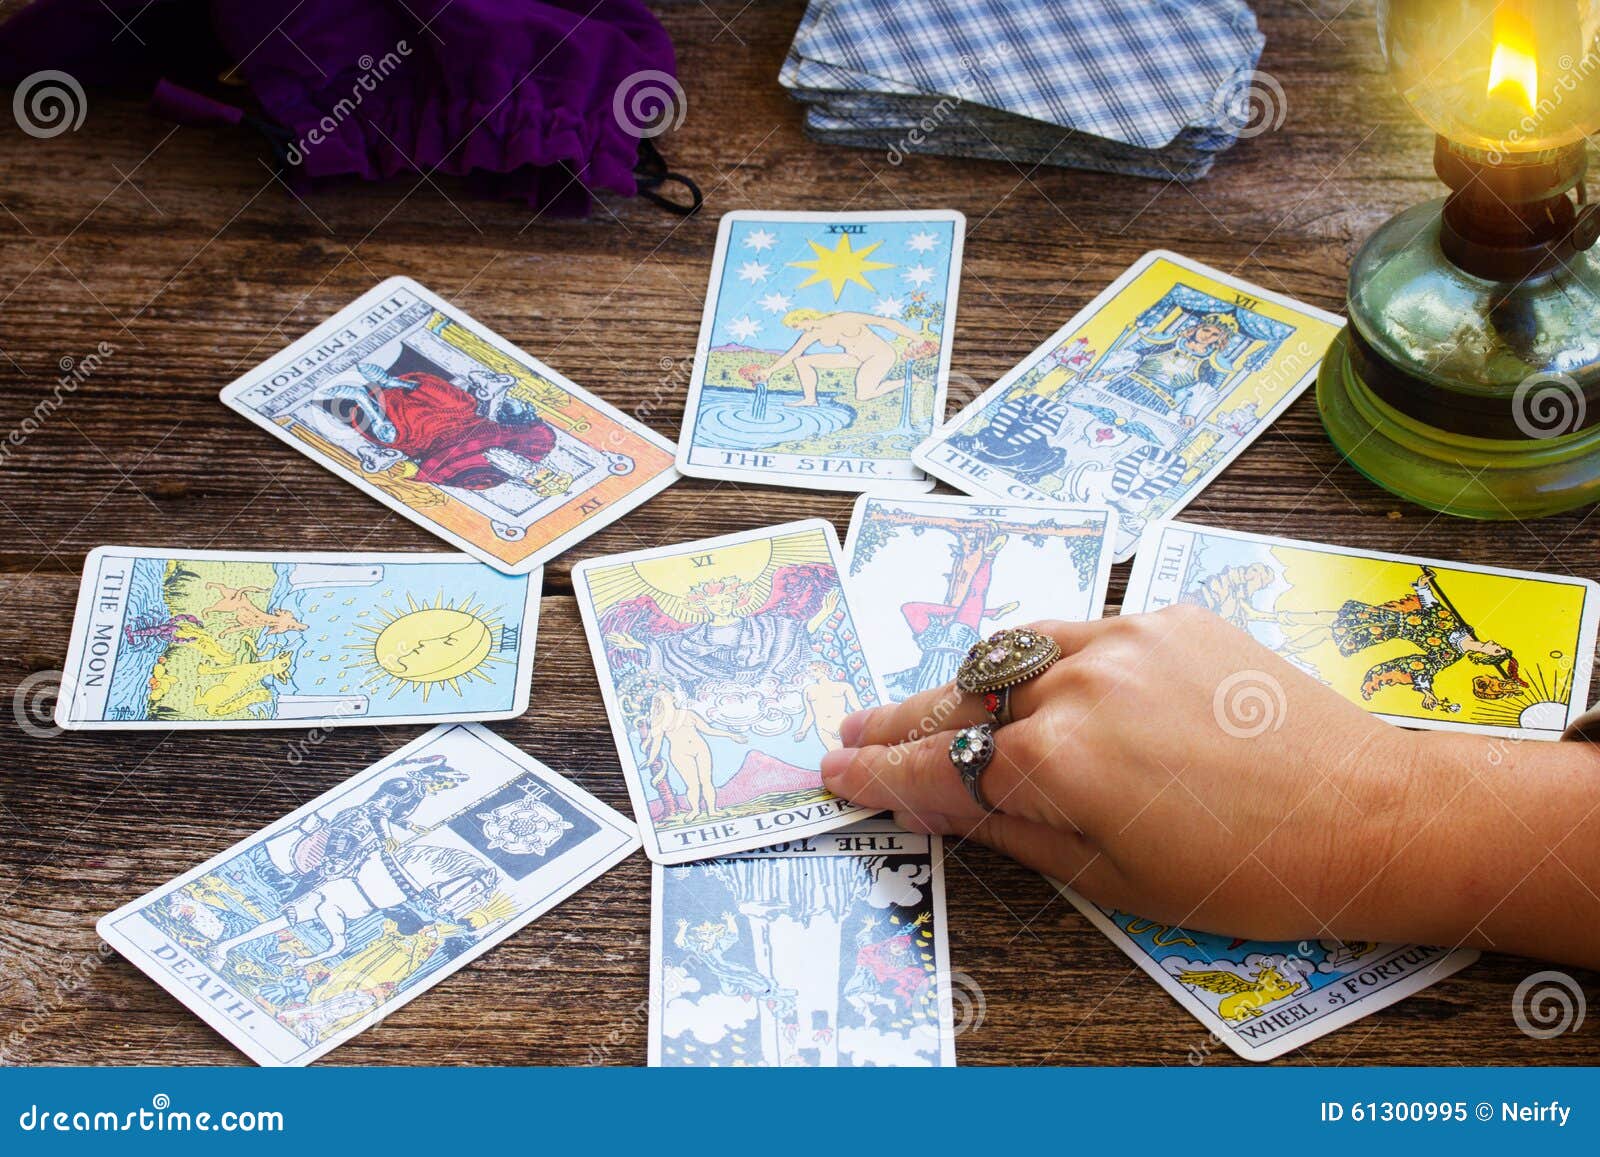 fortunetelling with tarot cards